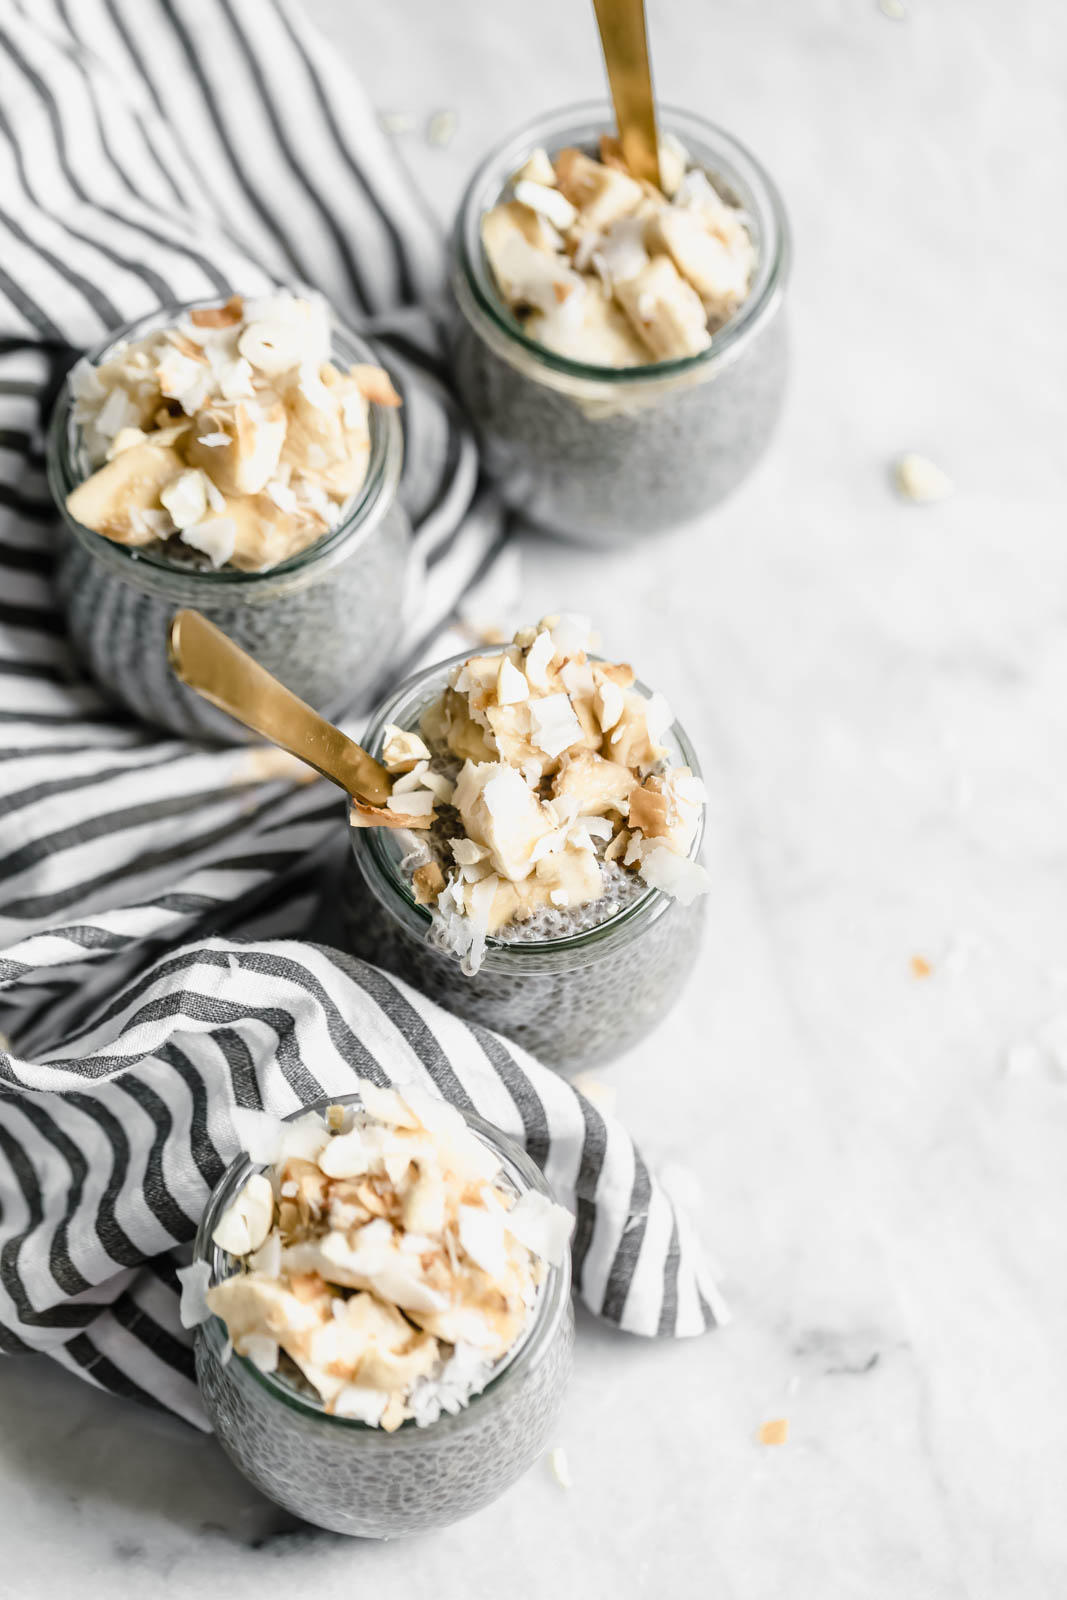 Creamy coconut chia pudding from above